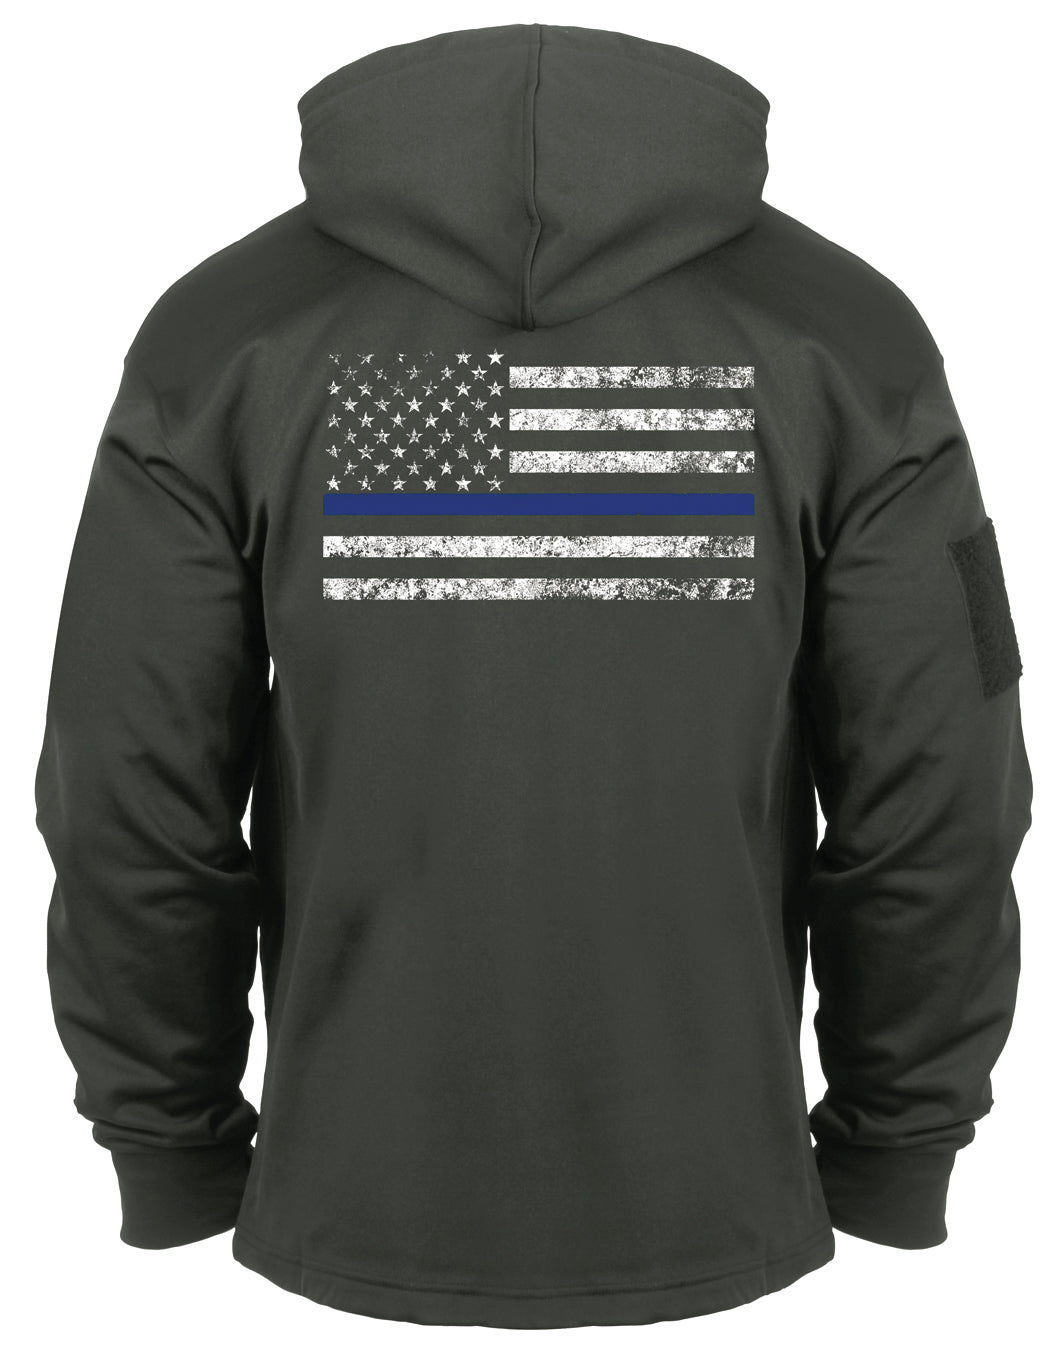 USA Flag Thin Blue Line Concealed Carry Hoodie Sweatshirt & Attachable TBL Patch